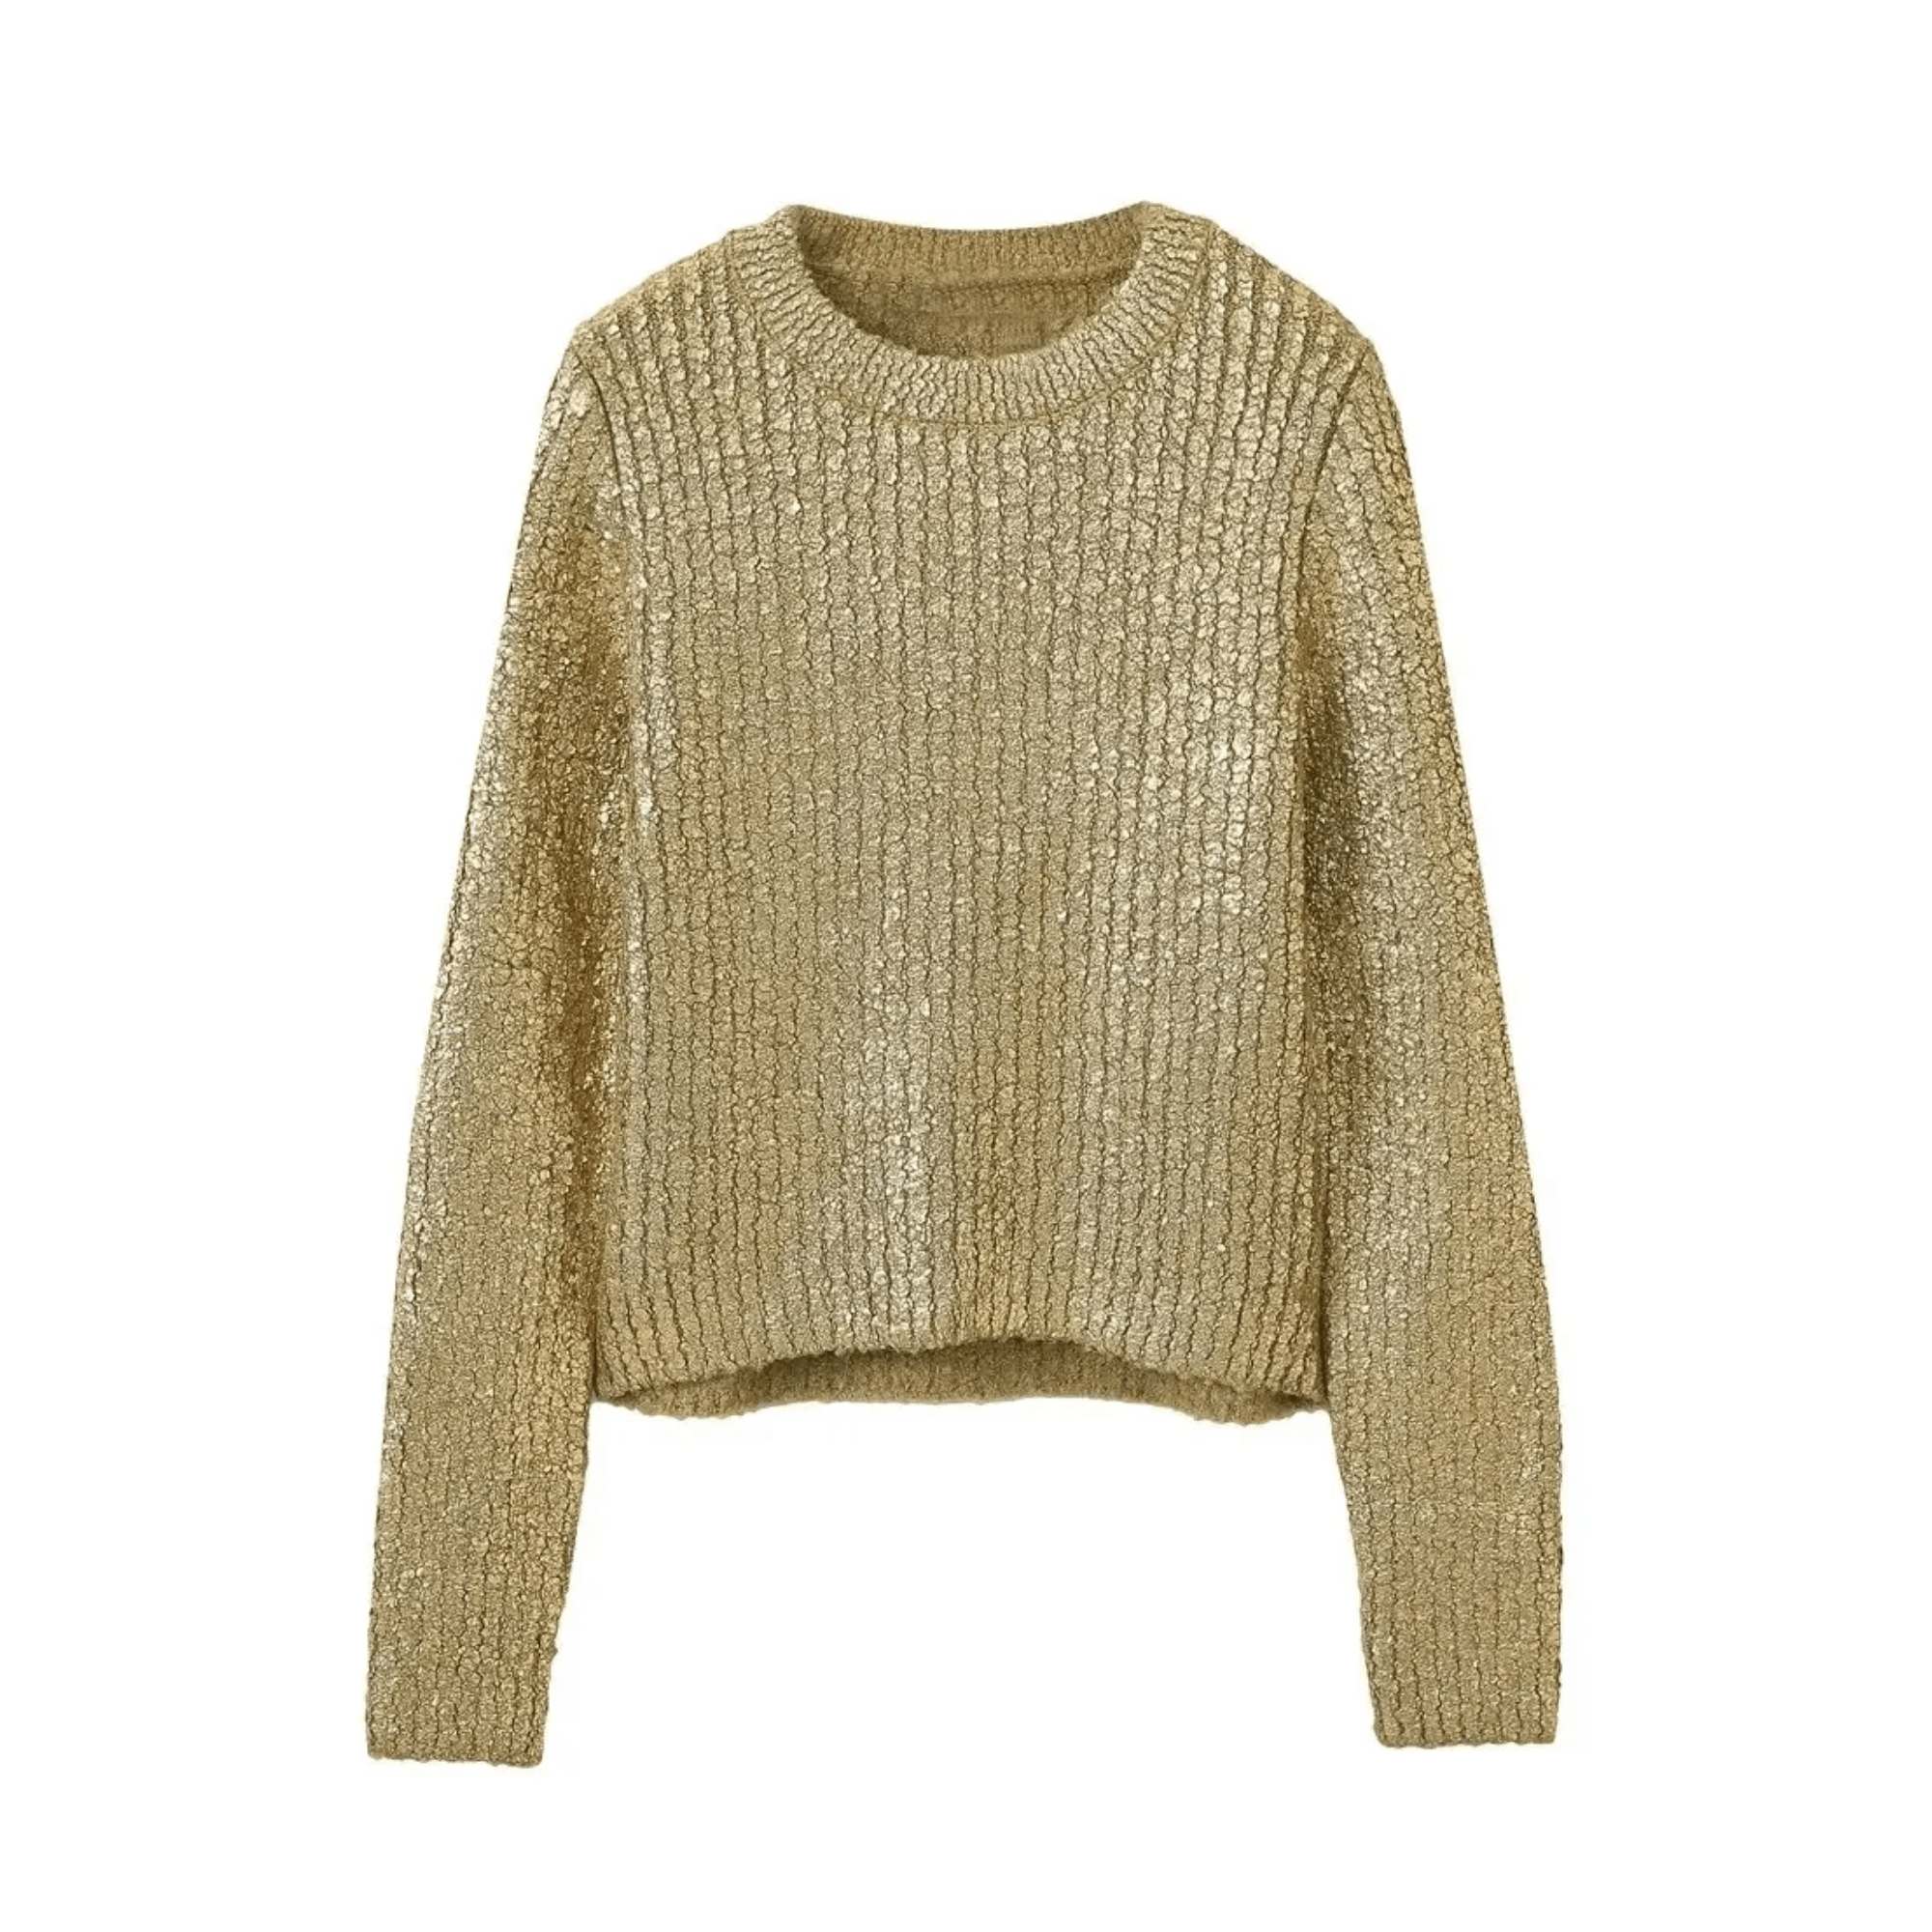 Cracked Metallic Gold Knitted Top - Kelly Obi New York